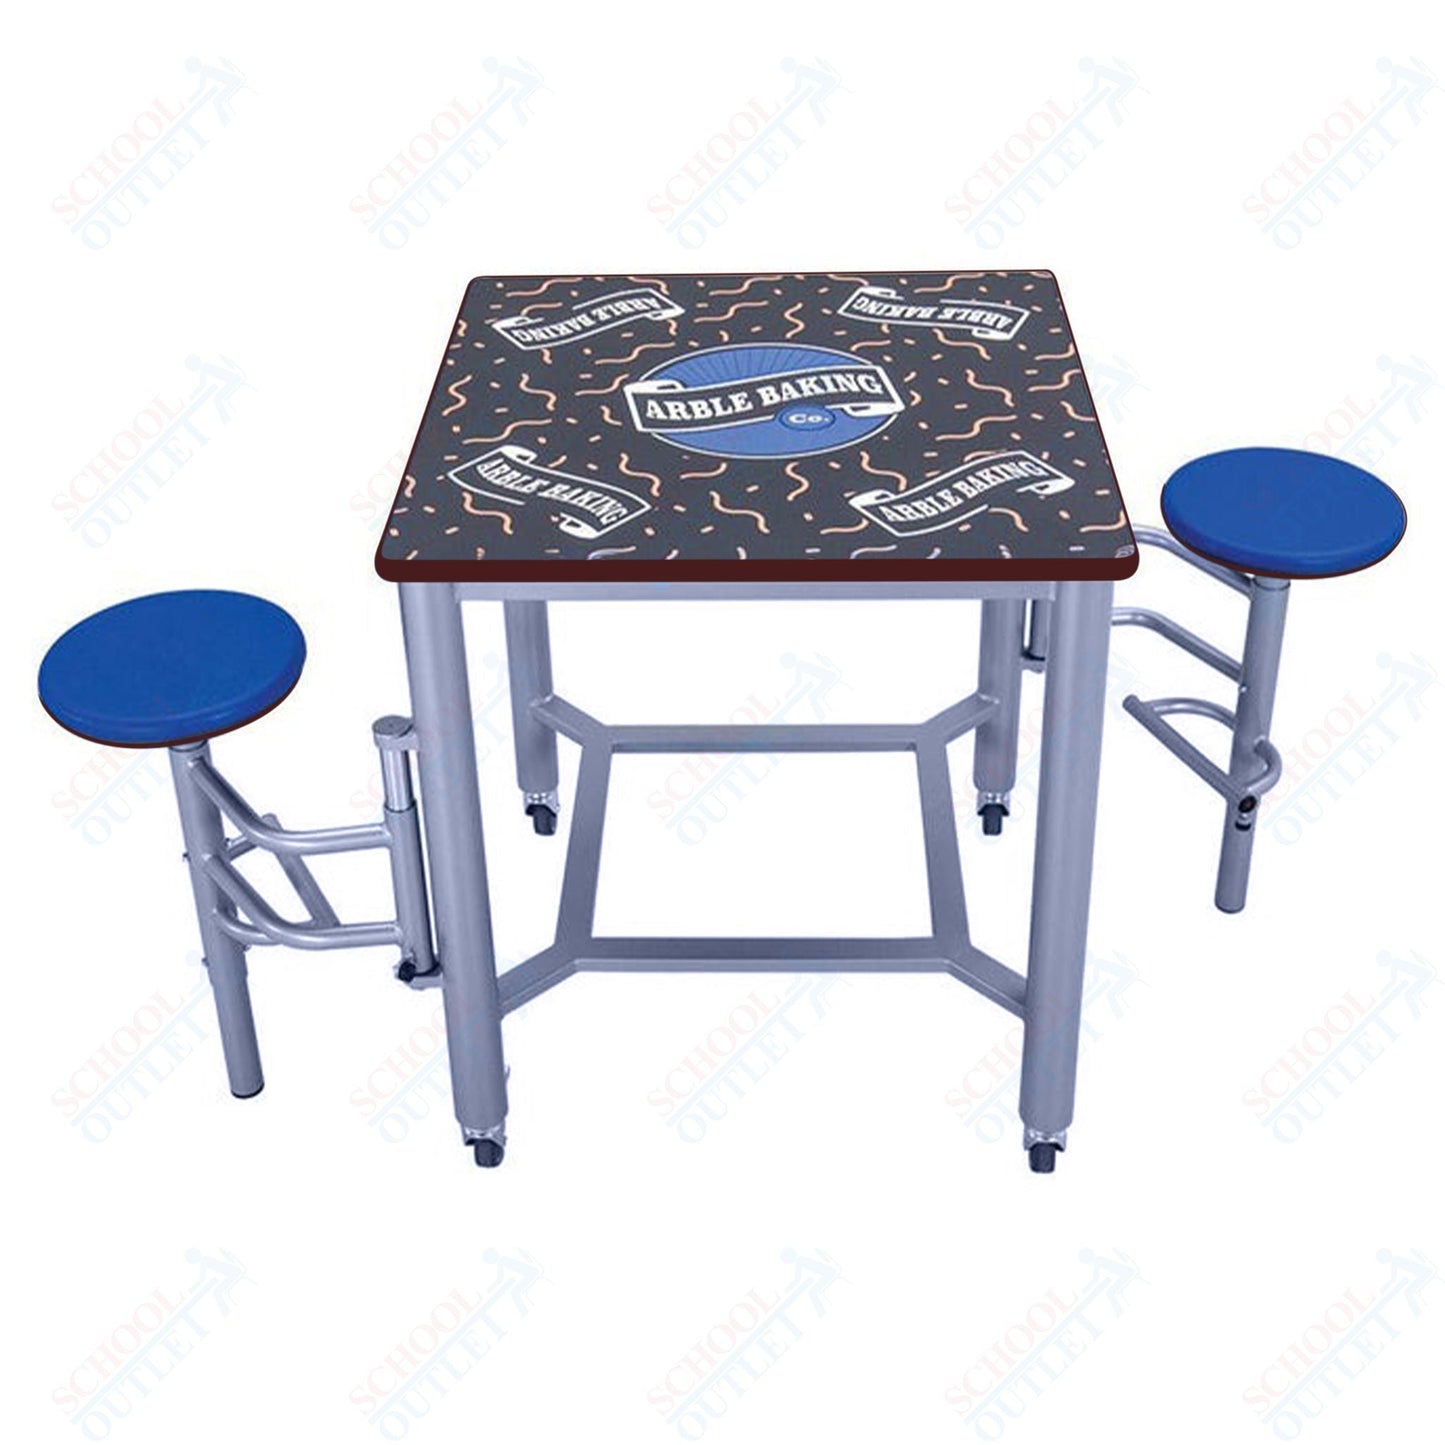 AmTab Mobile Stool Table - Double Collaboration High Table - 36"W x 36"L x 29"H - 2 Stools (AMT - MDST3636 - 29) - SchoolOutlet